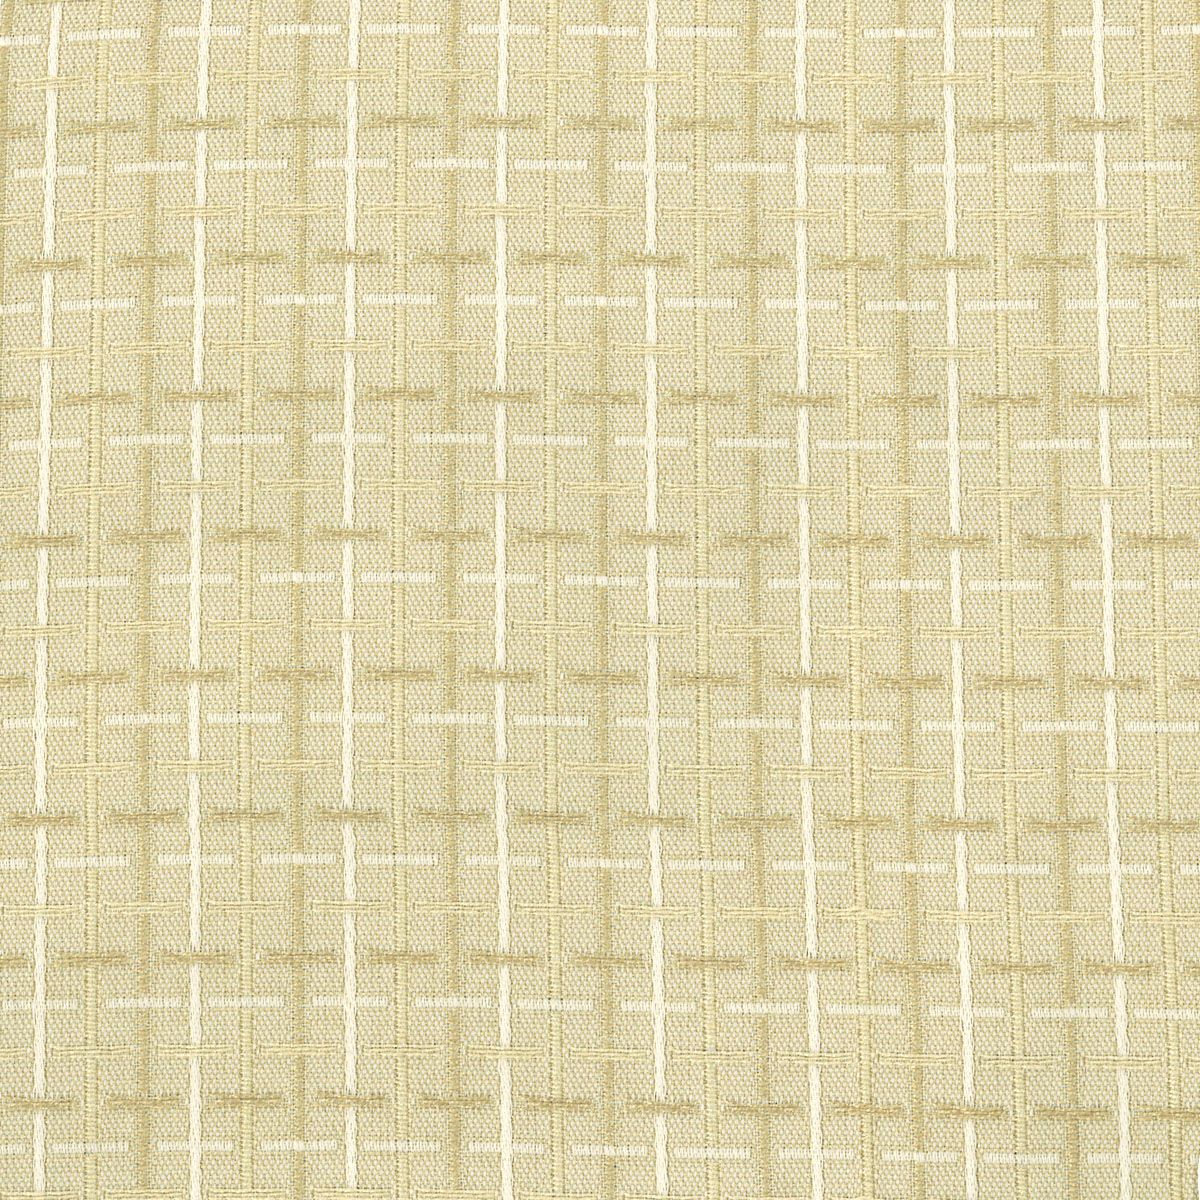 Lexington fabric in beige color - pattern number MT 0005MT67 - by Scalamandre in the Old World Weavers collection